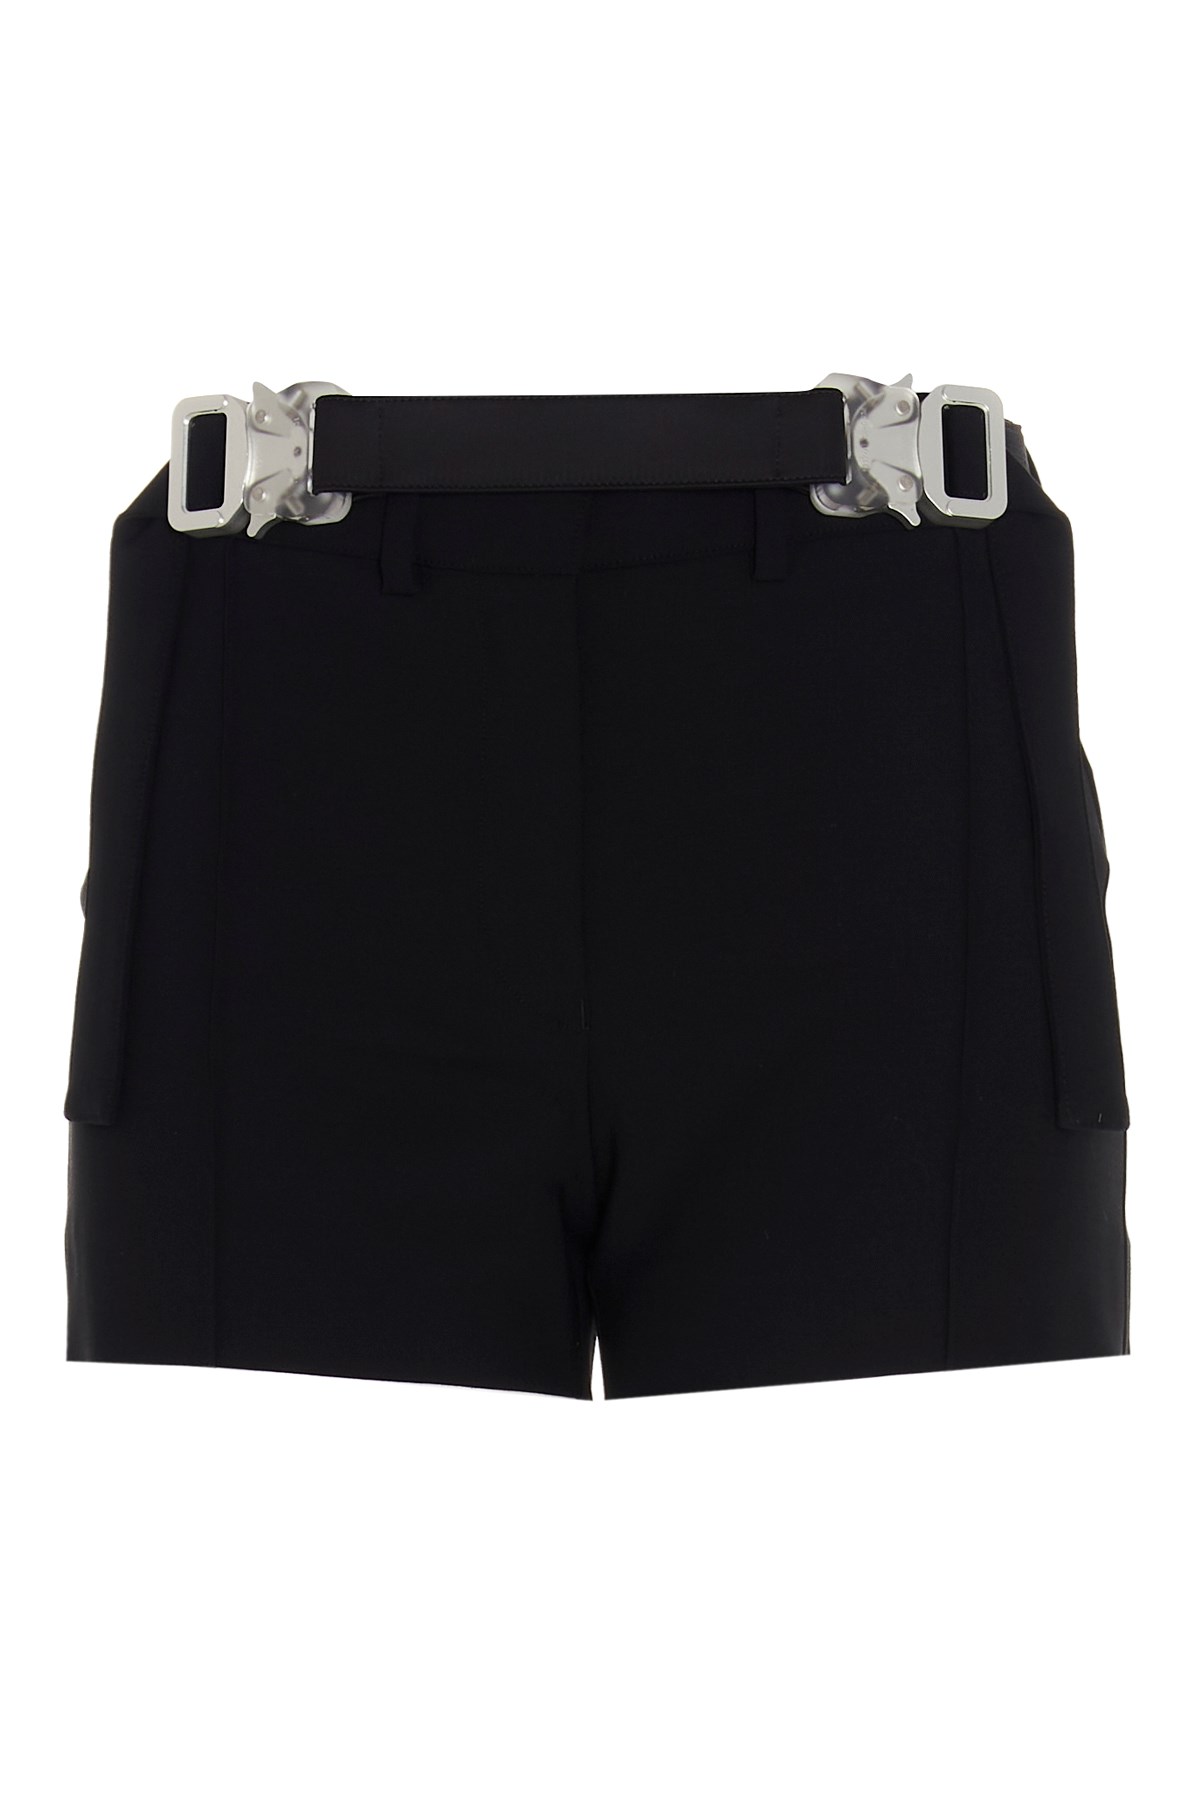 1017-ALYX-9SM 'Double Buckle’ Shorts